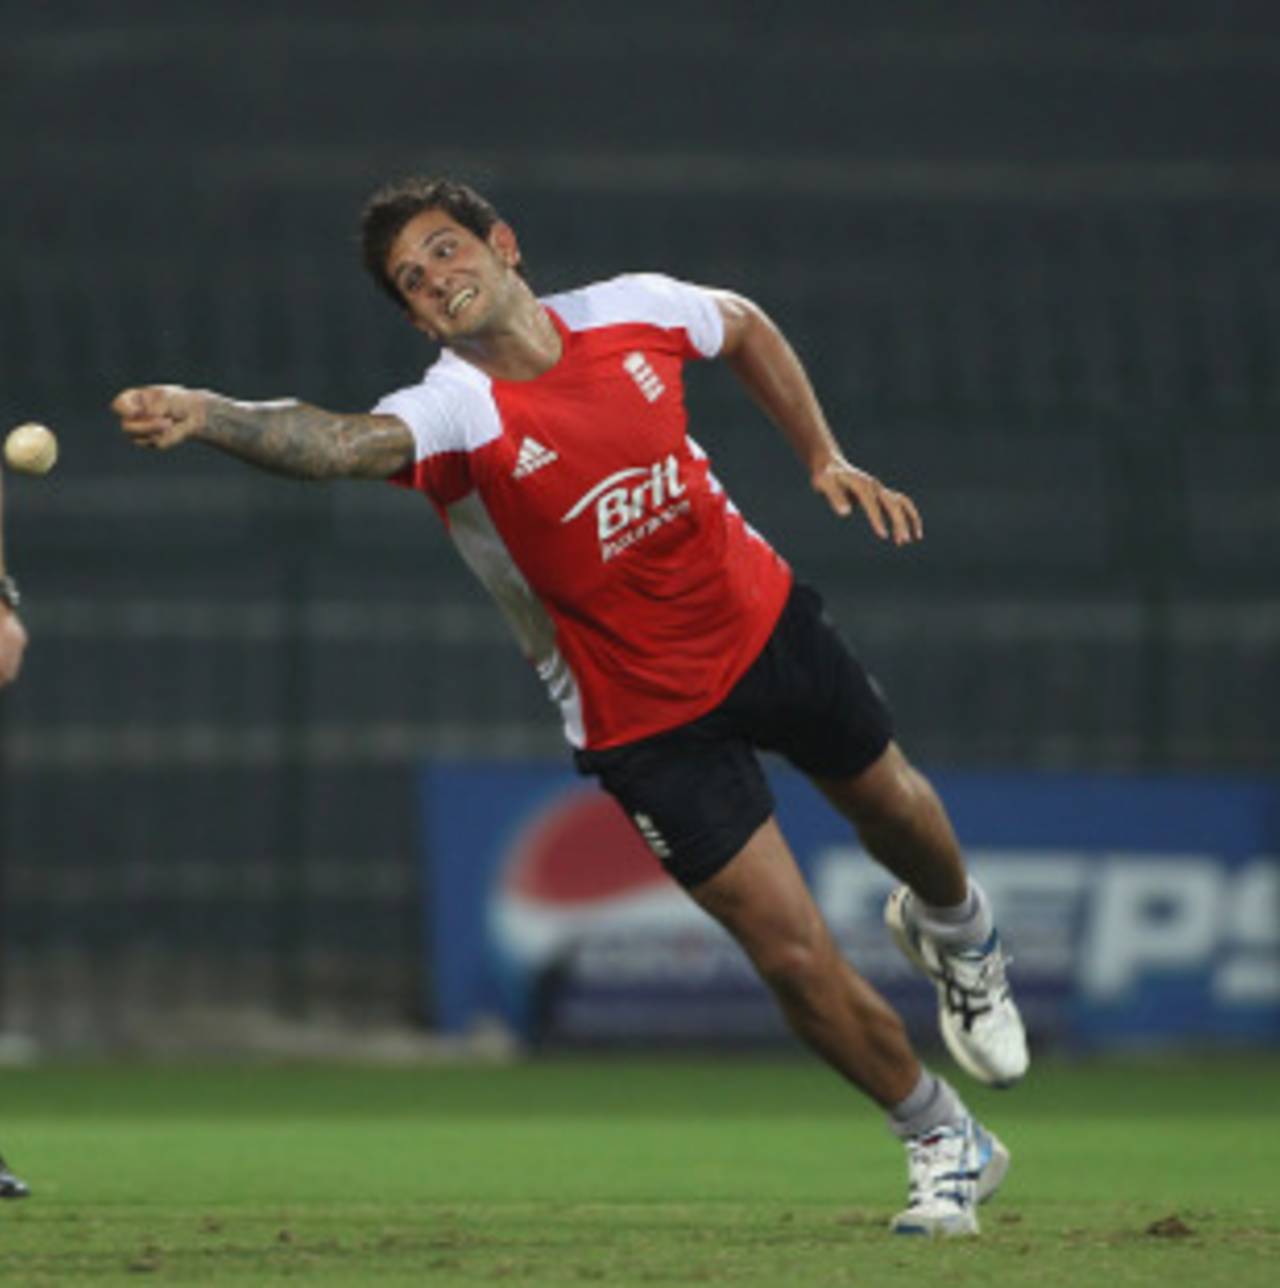 Jade Dernbach, England's latest squad member, strains to impress during practice, Colombo, March 22, 2011